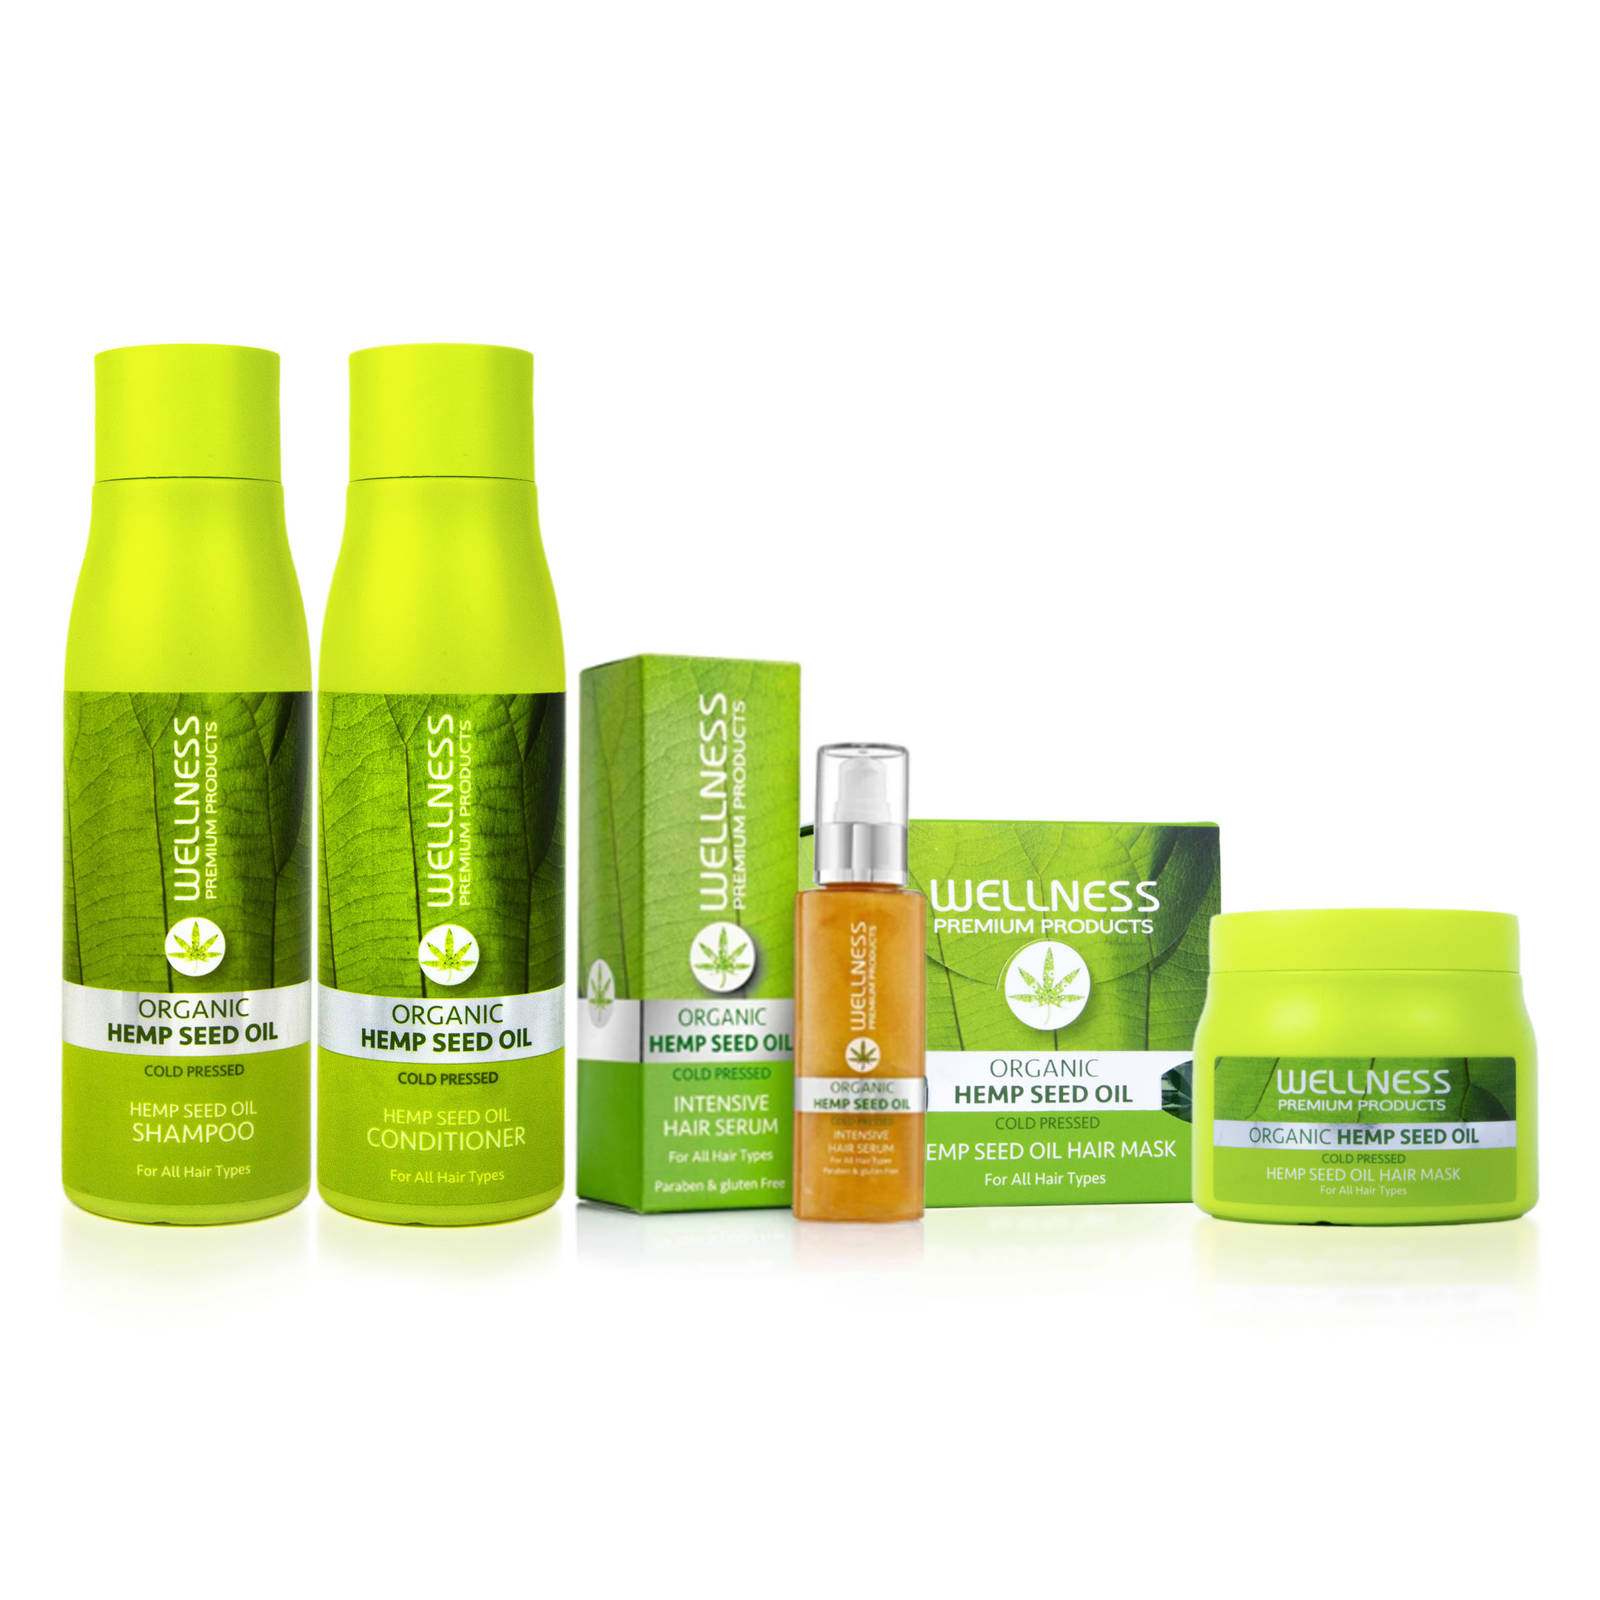 WELLNESS PREMIUM PRODUCTS intensive set (shampoo 500ml, conditioner 500ml,  serum 100ml, mask 500ml + 4 ampoules) | HAIR \ VALUE & GIFT SETS SETS |  